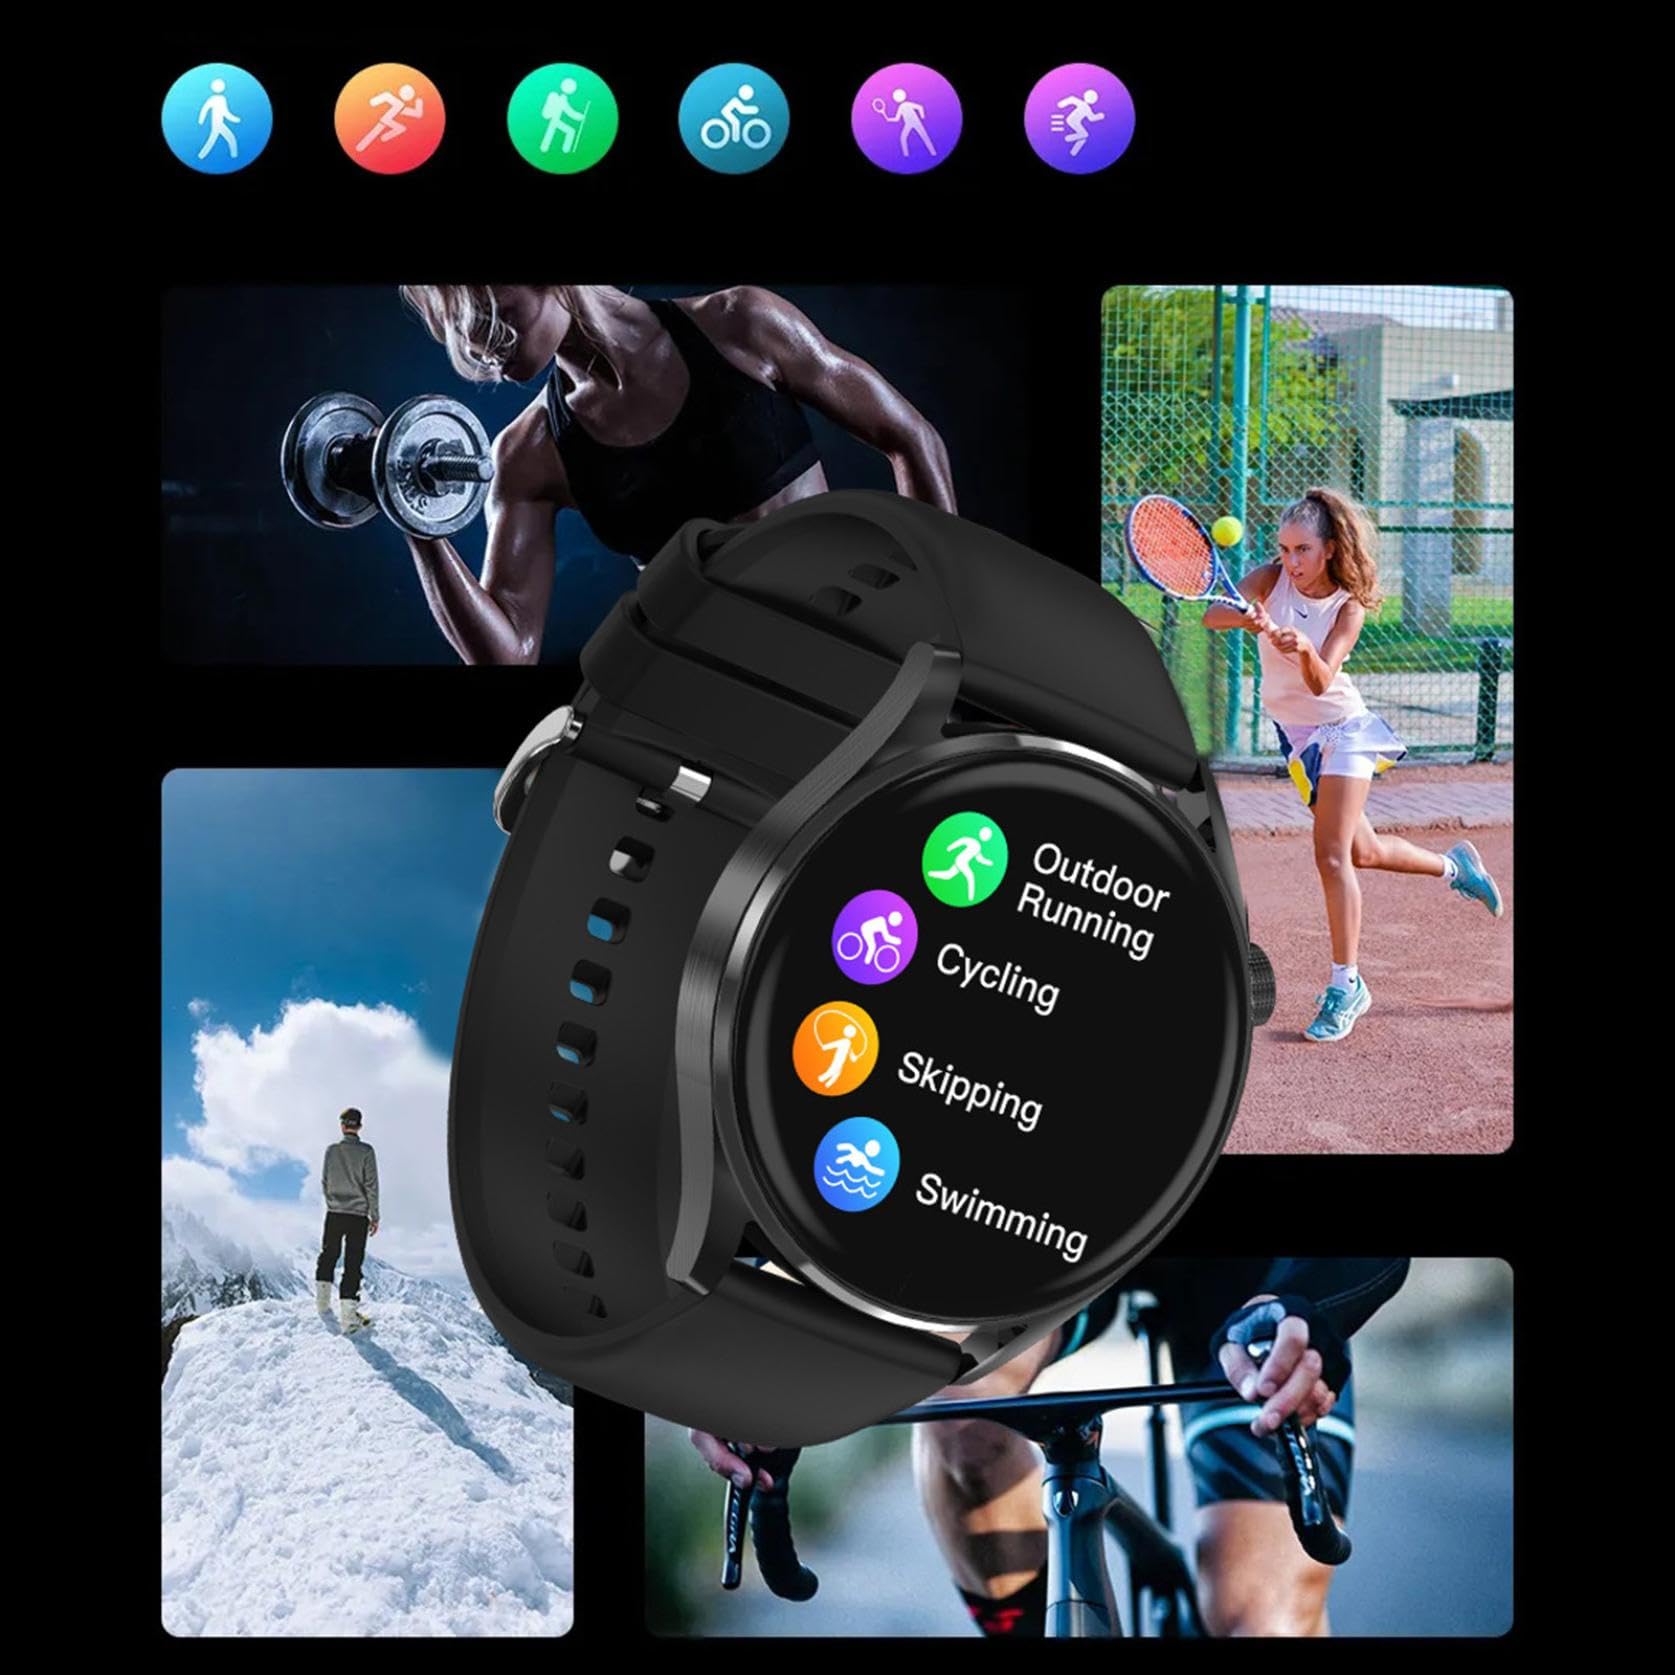 Smart Watch, 1.38 Inch Smartwatch Ip67 Fitness Watch with Round Full Touching Color Screen, Pedometer Sleep for Android, iOS New Upgrate (Black)